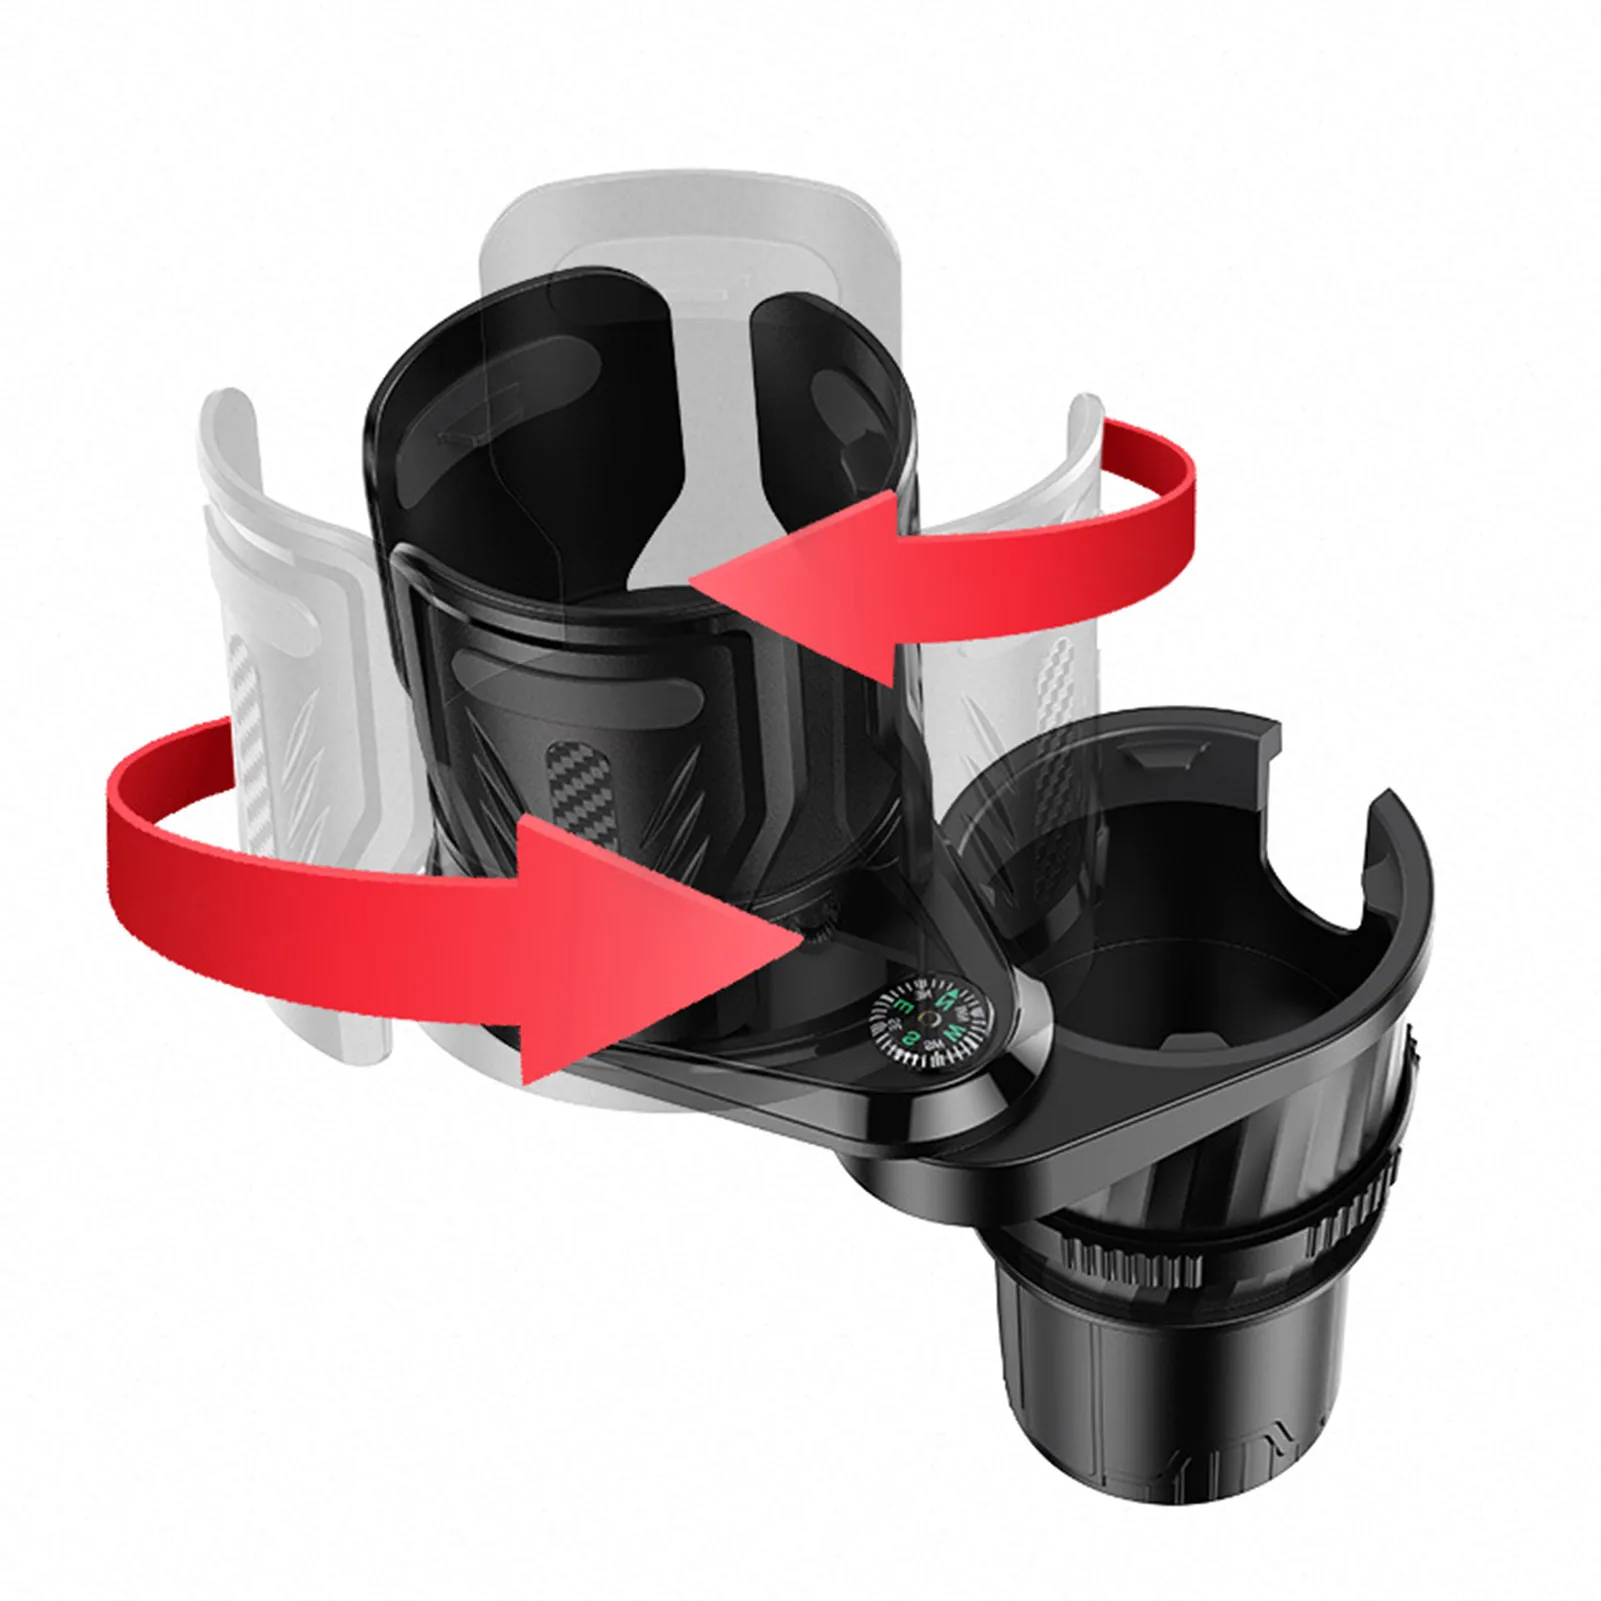 2 In 1 Multifunctional Adjustable Car Cup Holder Expander Adapter Base Tray  Car Drink Cup Bottle Holder Auto Car Stand Organizer - Drinks Holders -  AliExpress